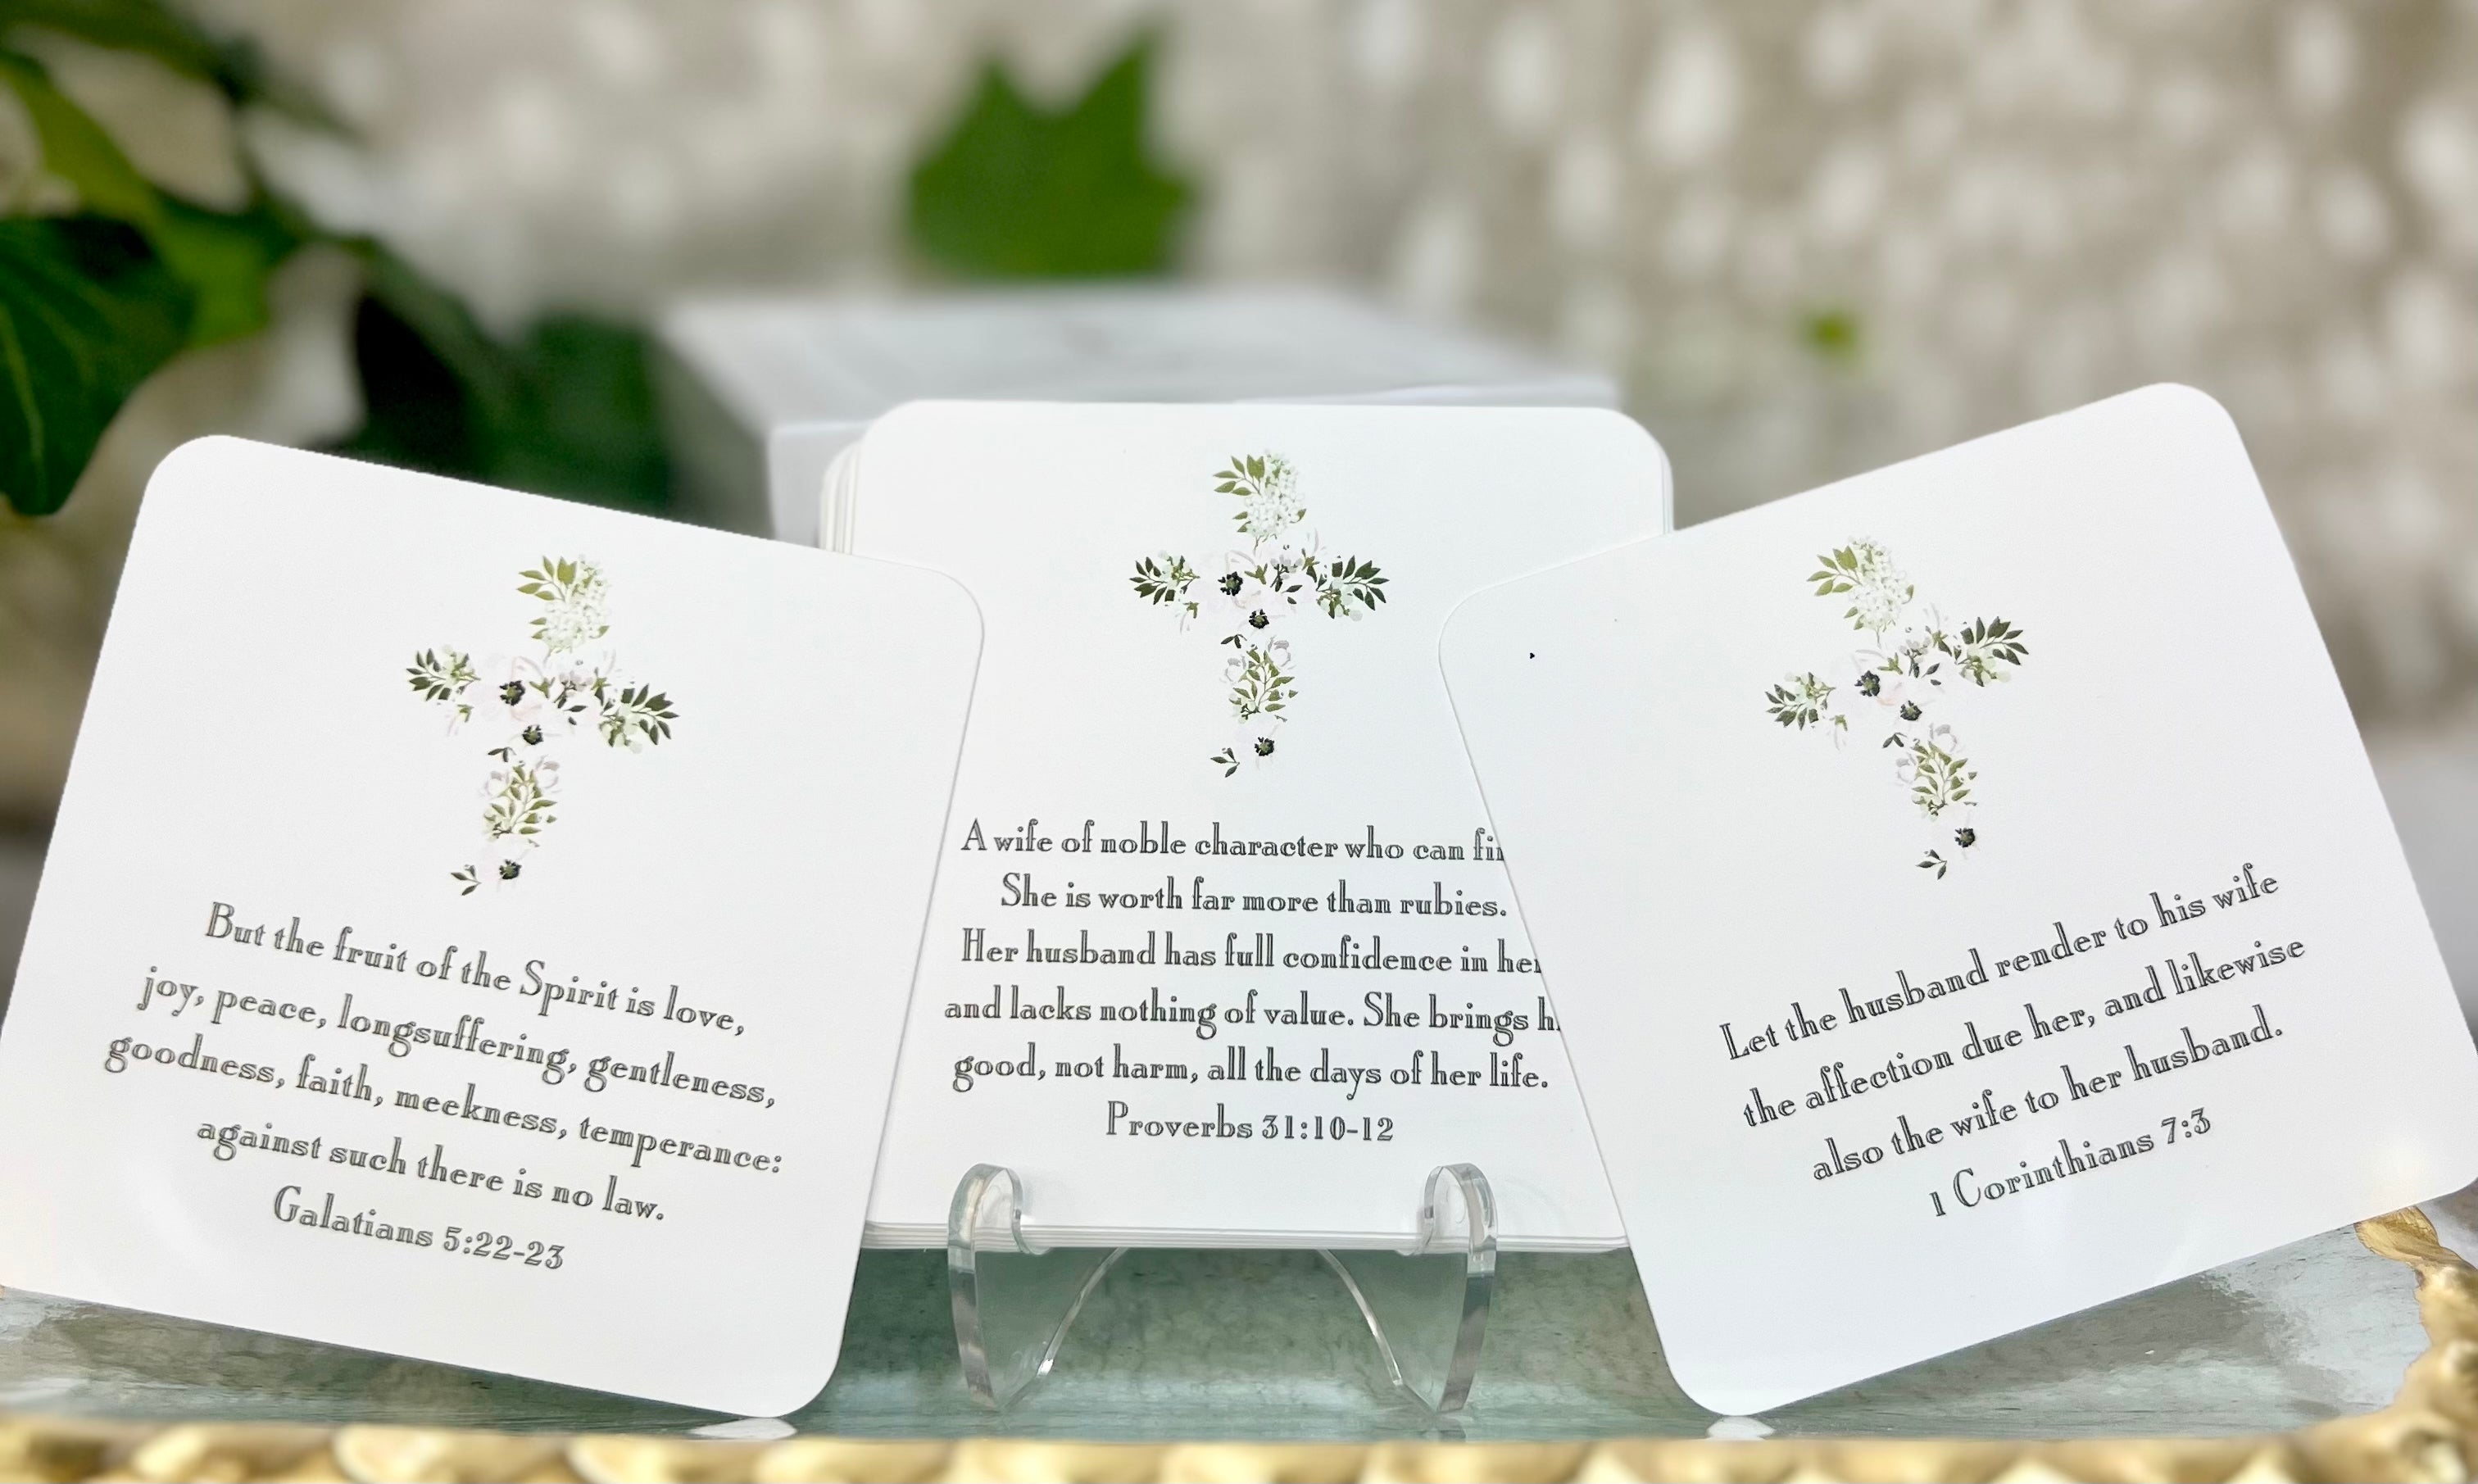 Marriage scripture cards